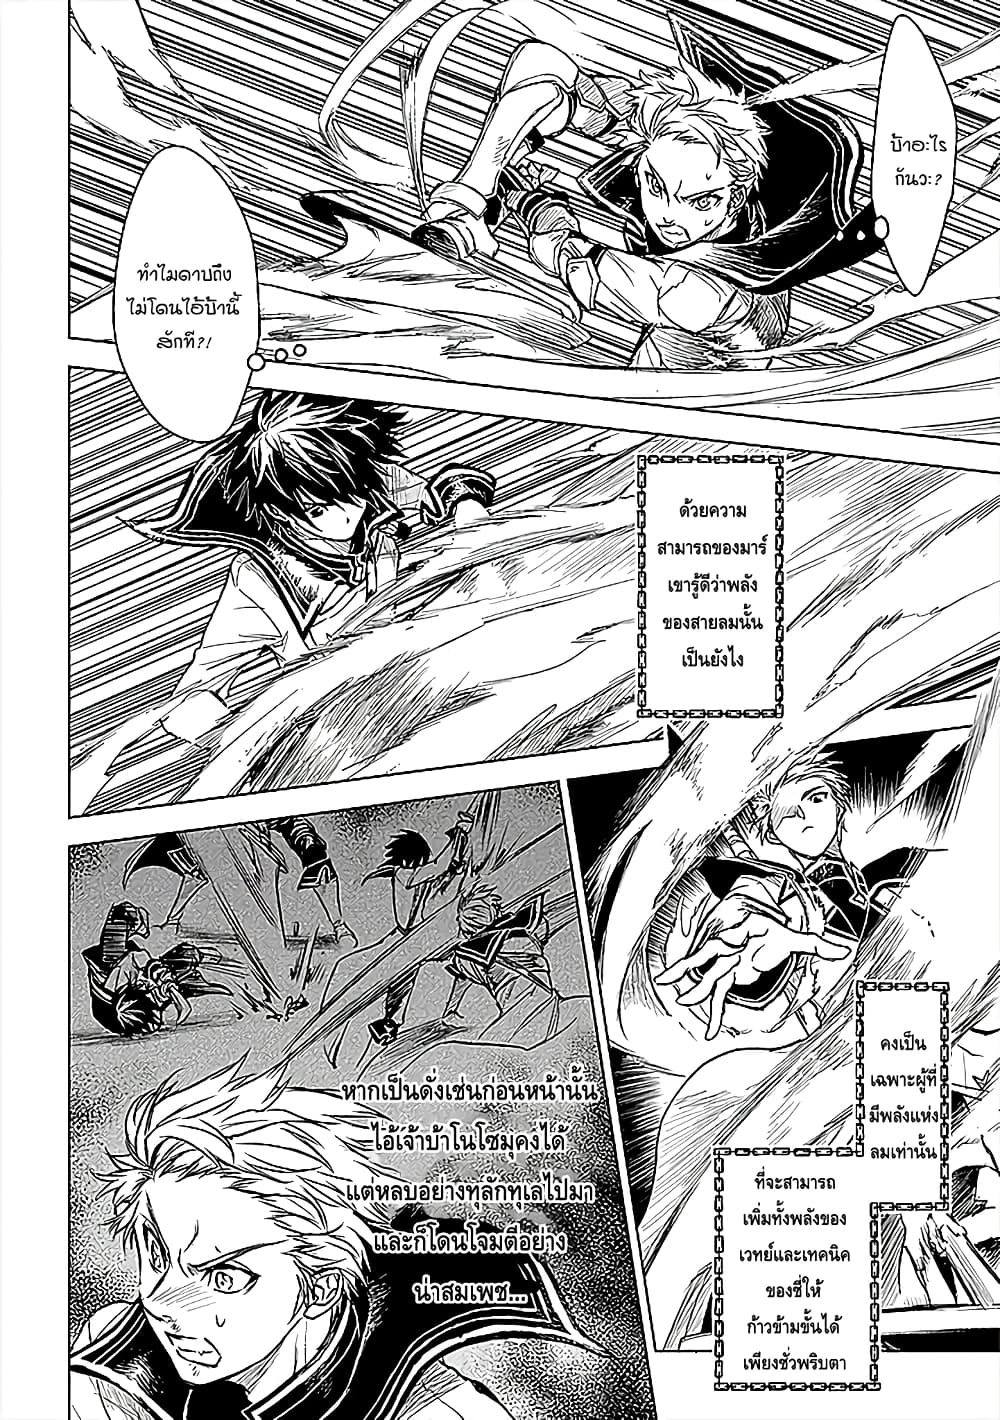 Ori of the Dragon Chain Heart in the Mind 11 (9)